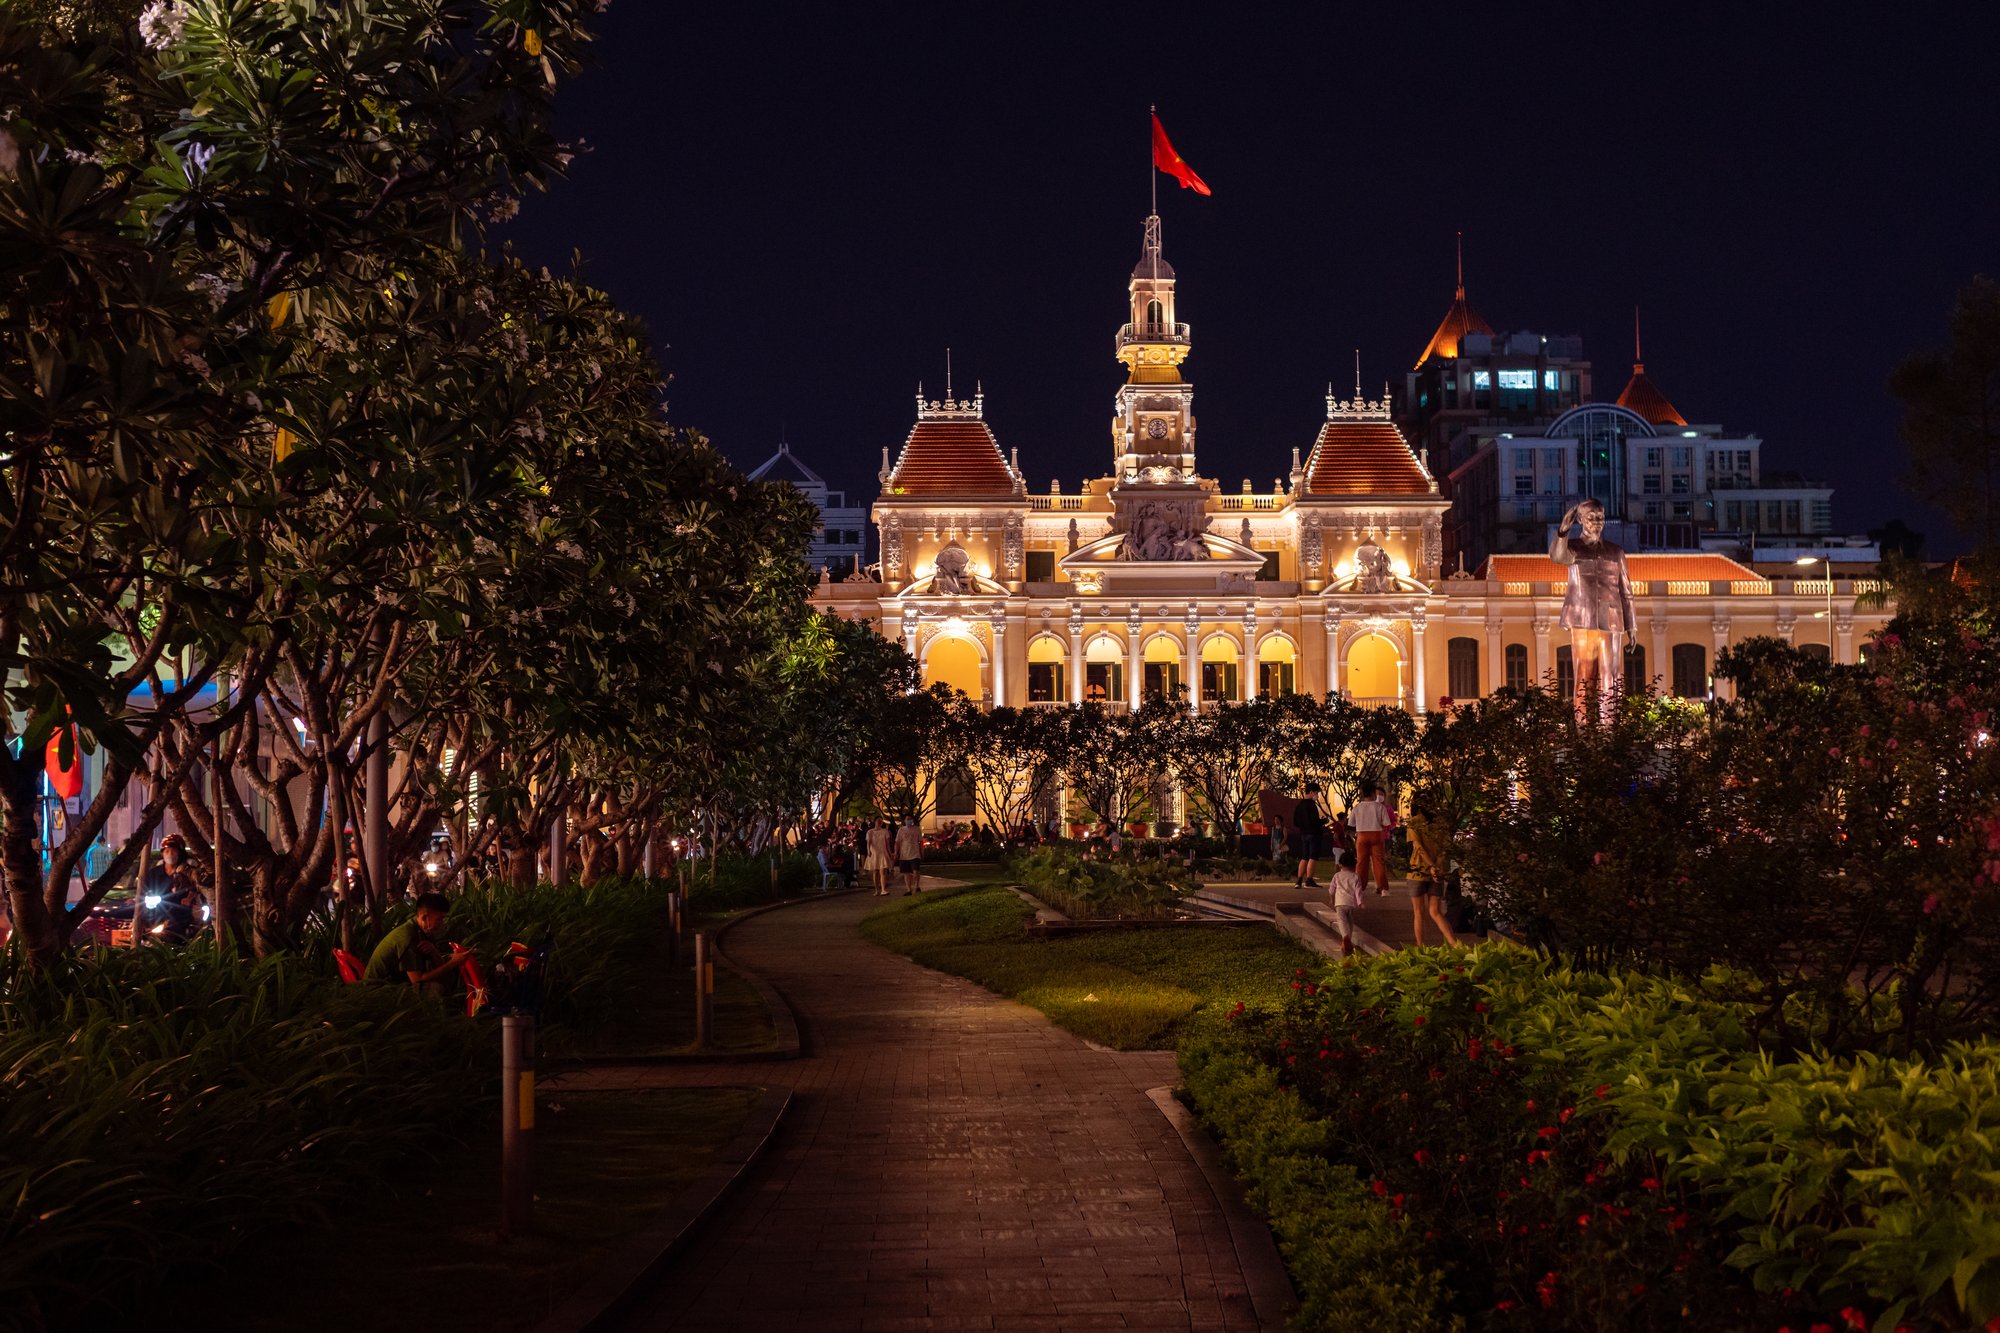 Ho Chi Minh City People's Committee Building